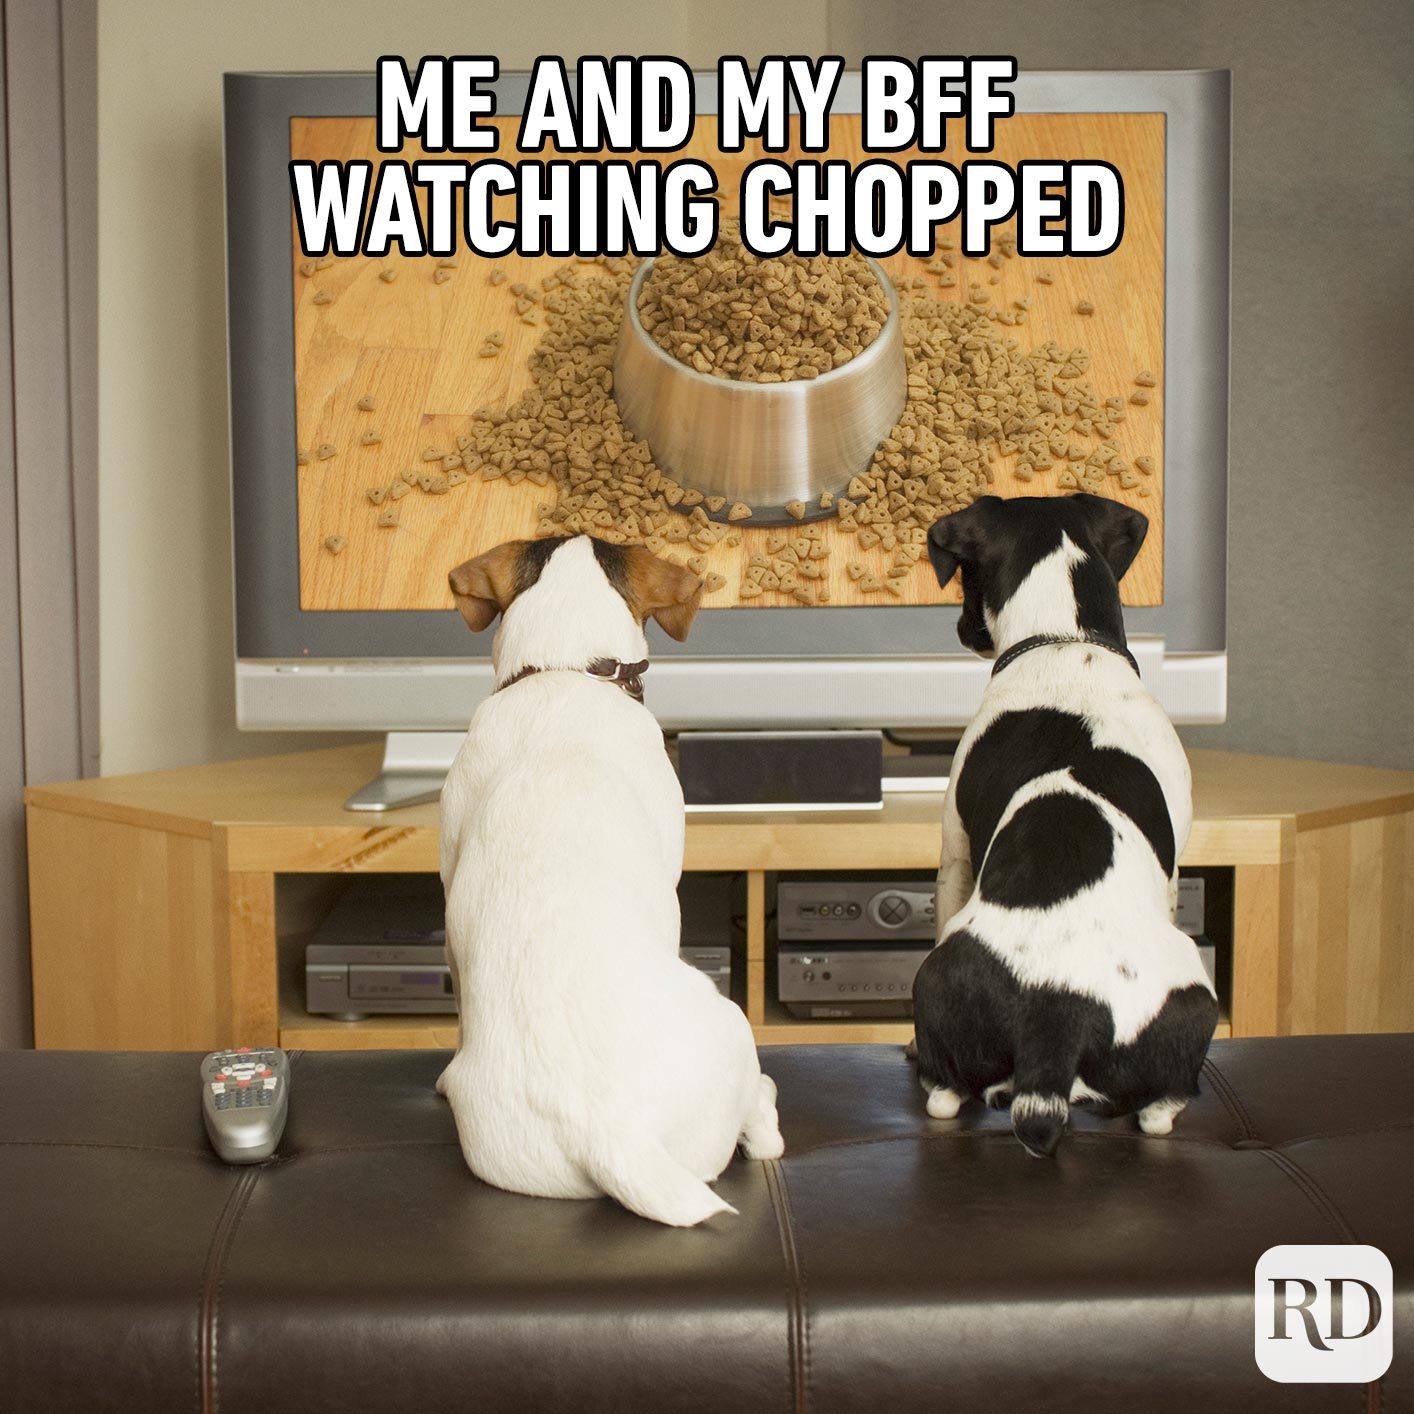 Two dogs watching a kibble commercial on TV. Meme text: Me and my bff watching Chopped